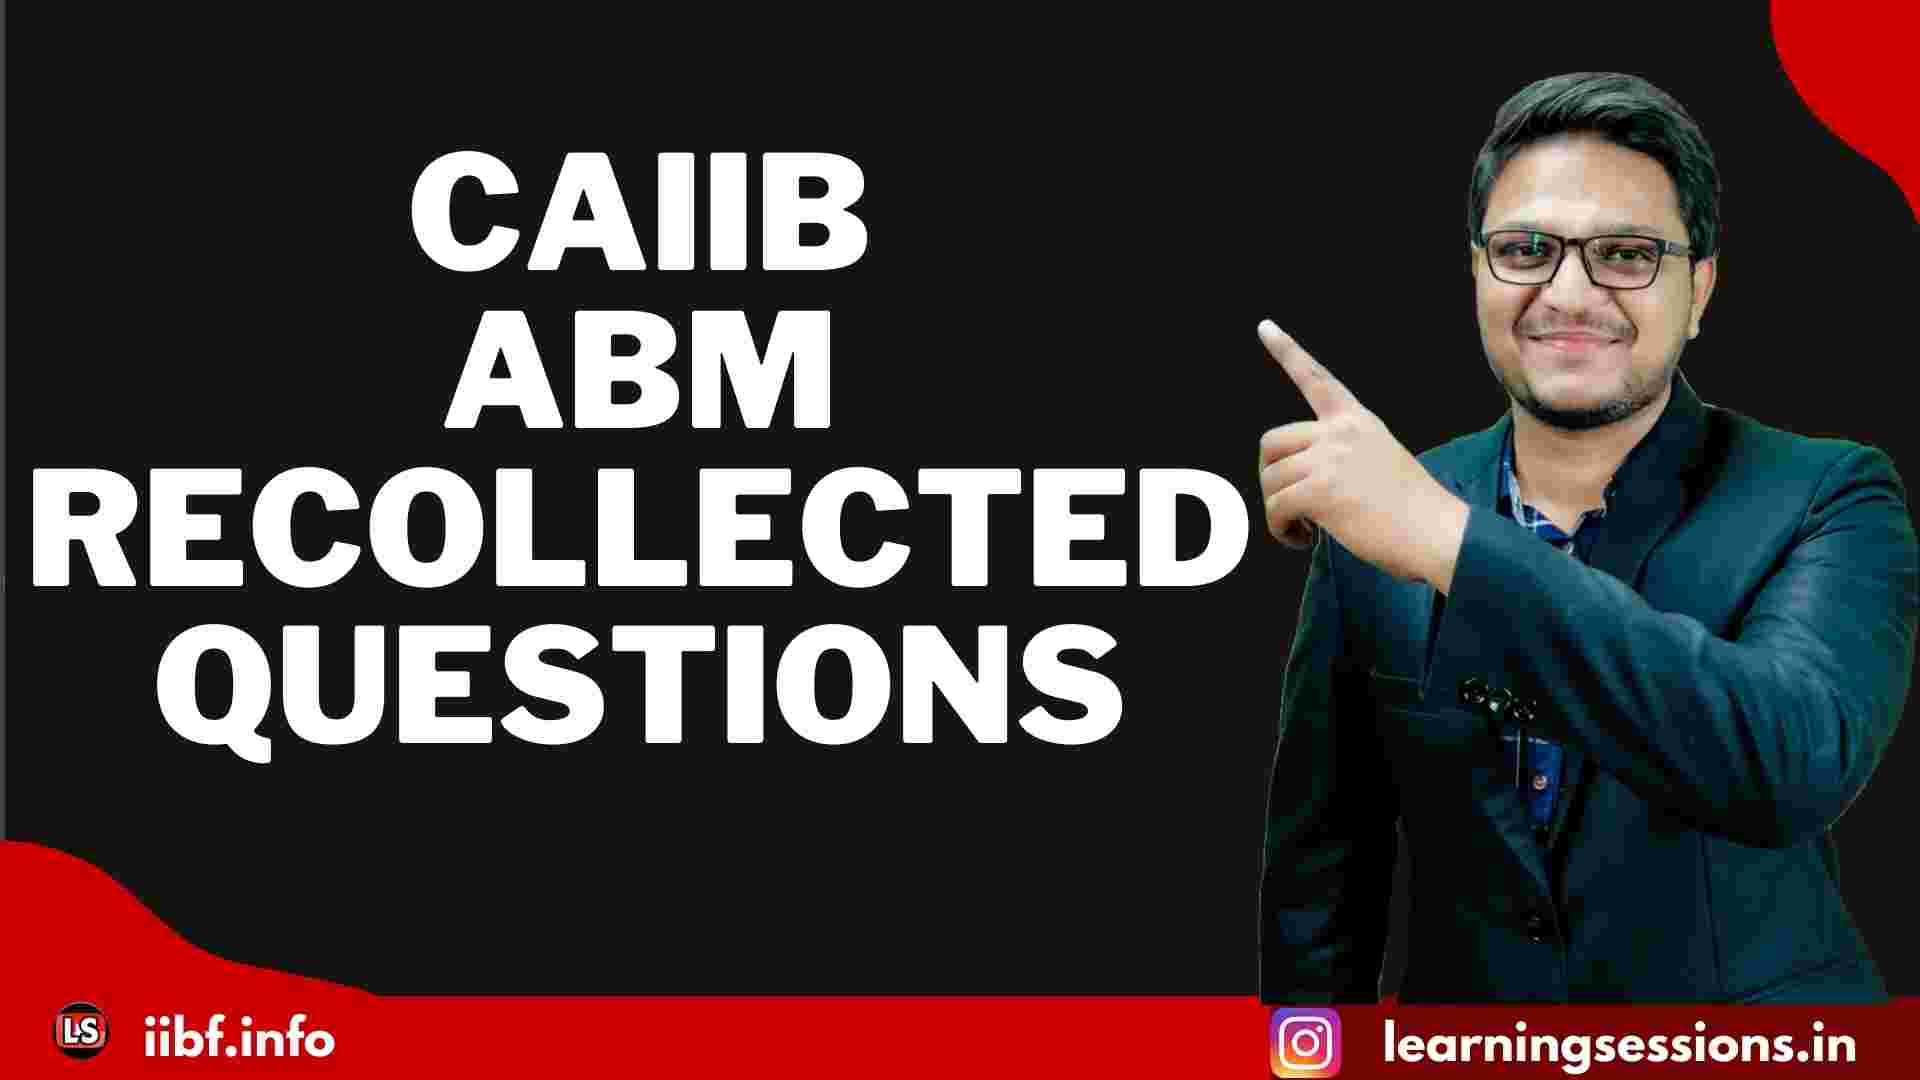 IIBF CAIIB ABM RECOLLECTED QUESTIONS FOR 2021-2022 EXAM